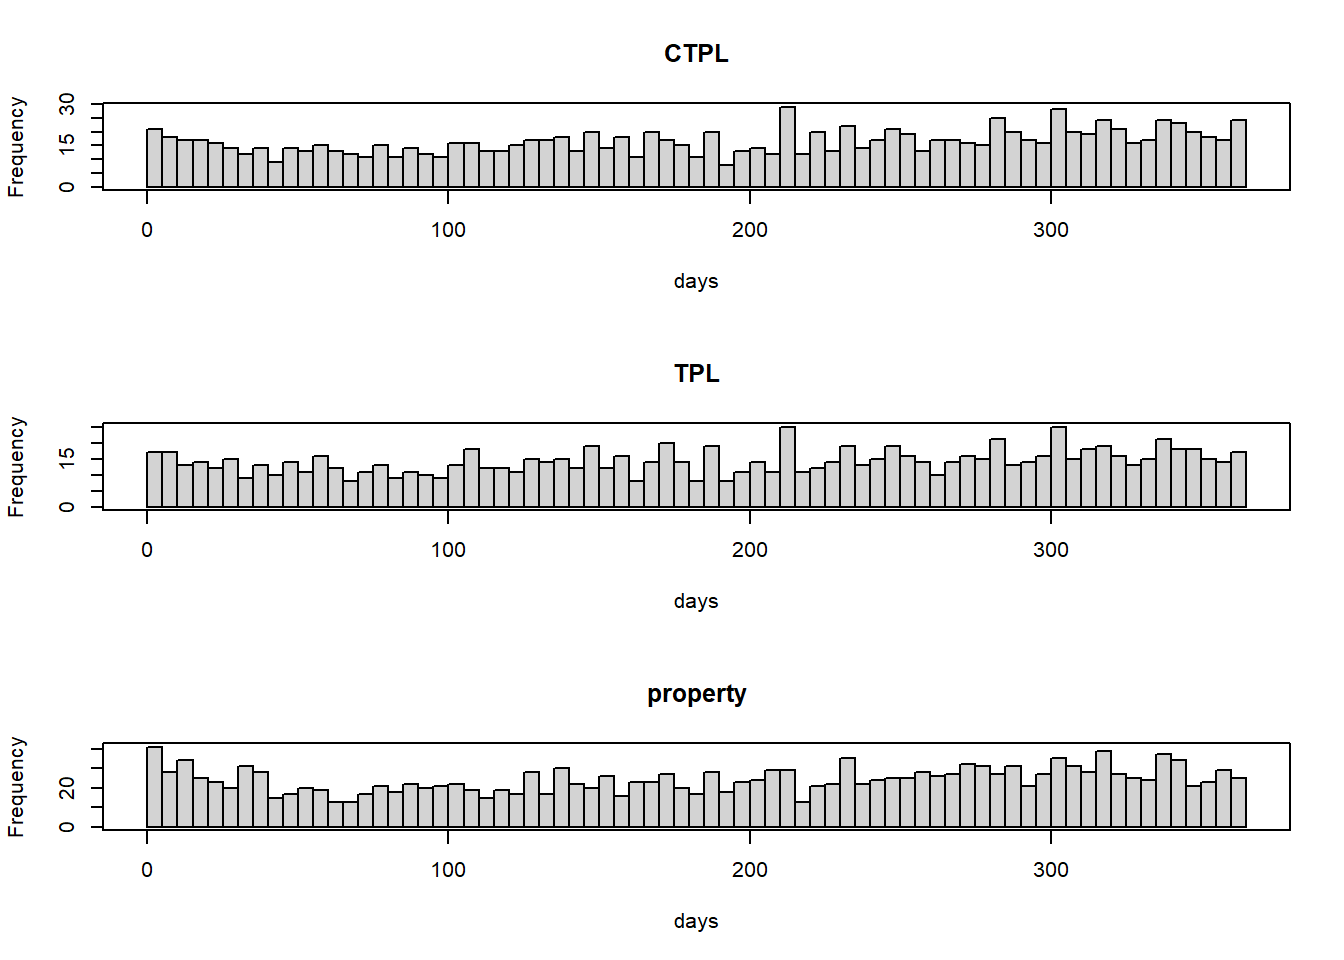 The histograms of the days between the reporting and the expiration